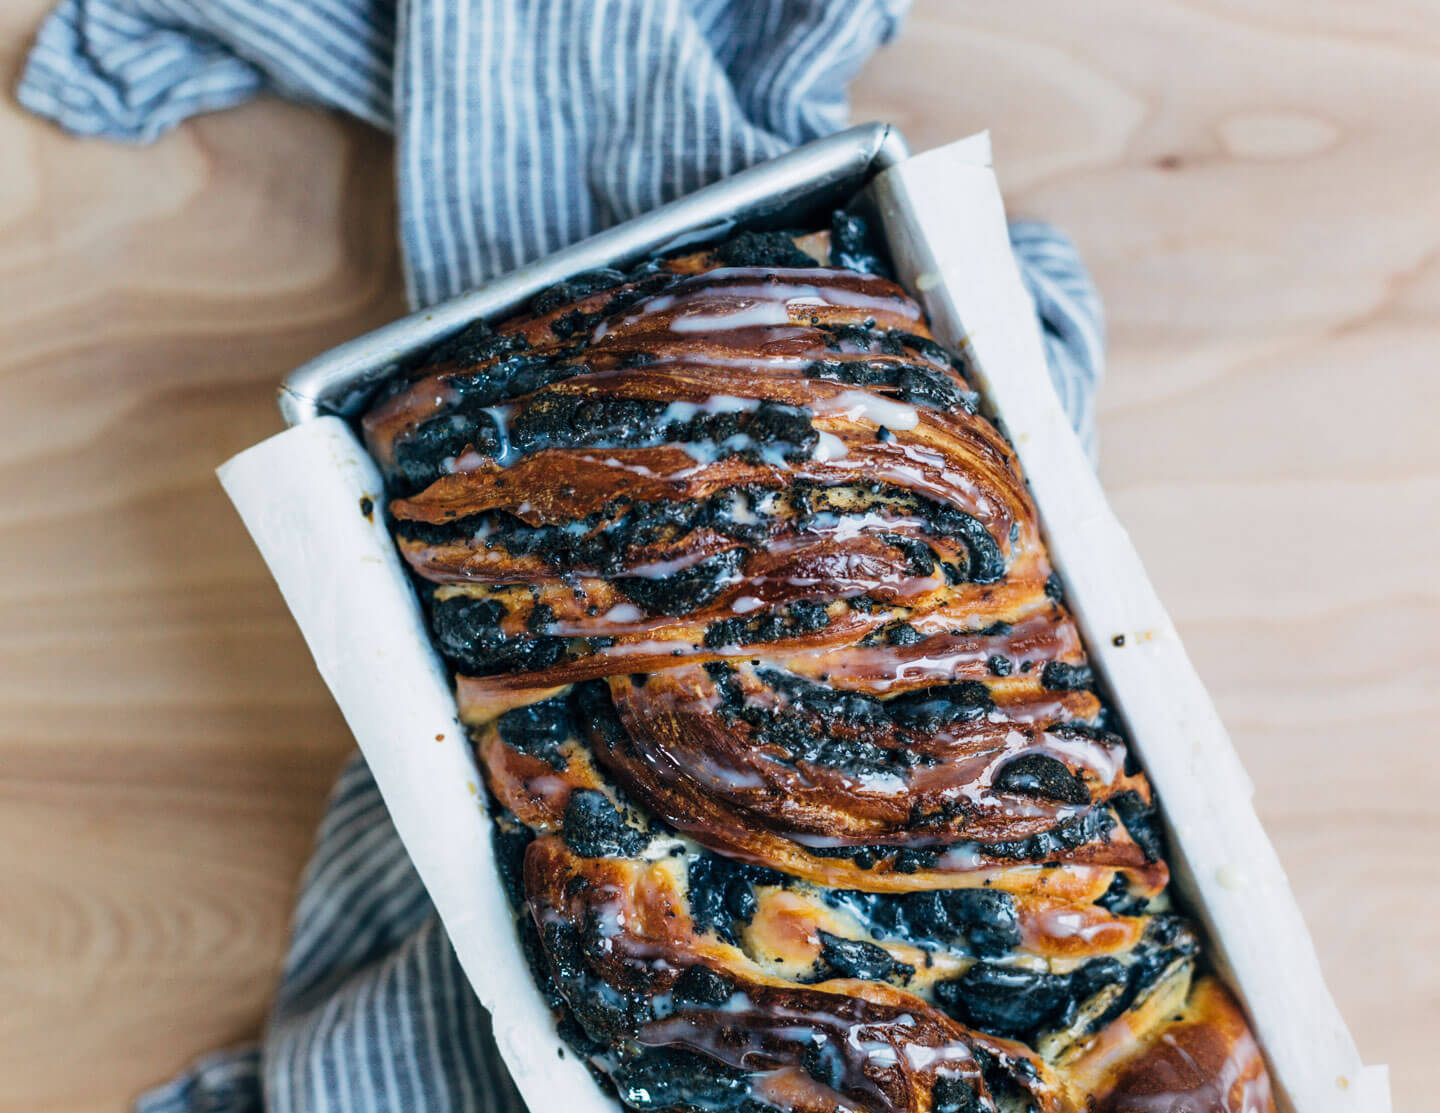 A sweet and pillowy yeasted twist bread recipe with nutty swirls of black sesame paste, from A Common Table by Cynthia Chen McTernan.